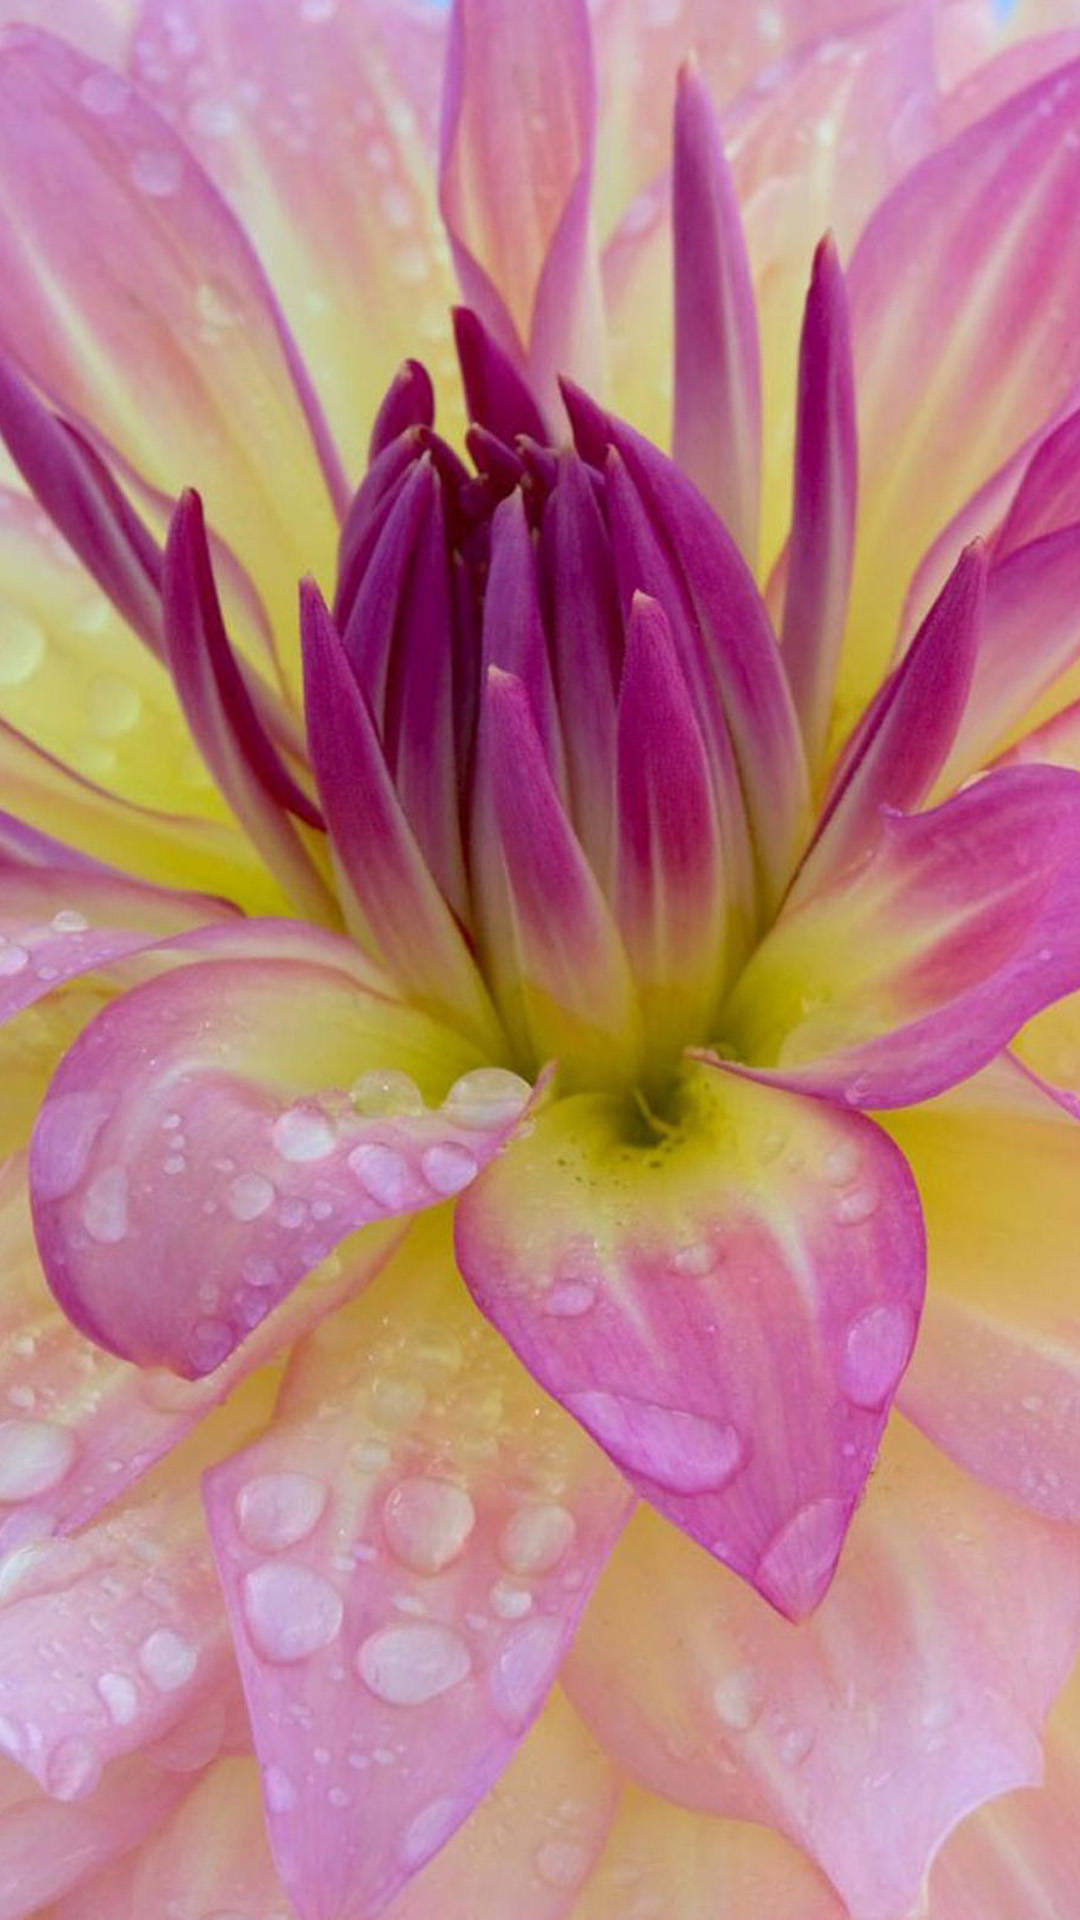 Fresh flowers with water drops HD samsung galaxy s4 wallpaper